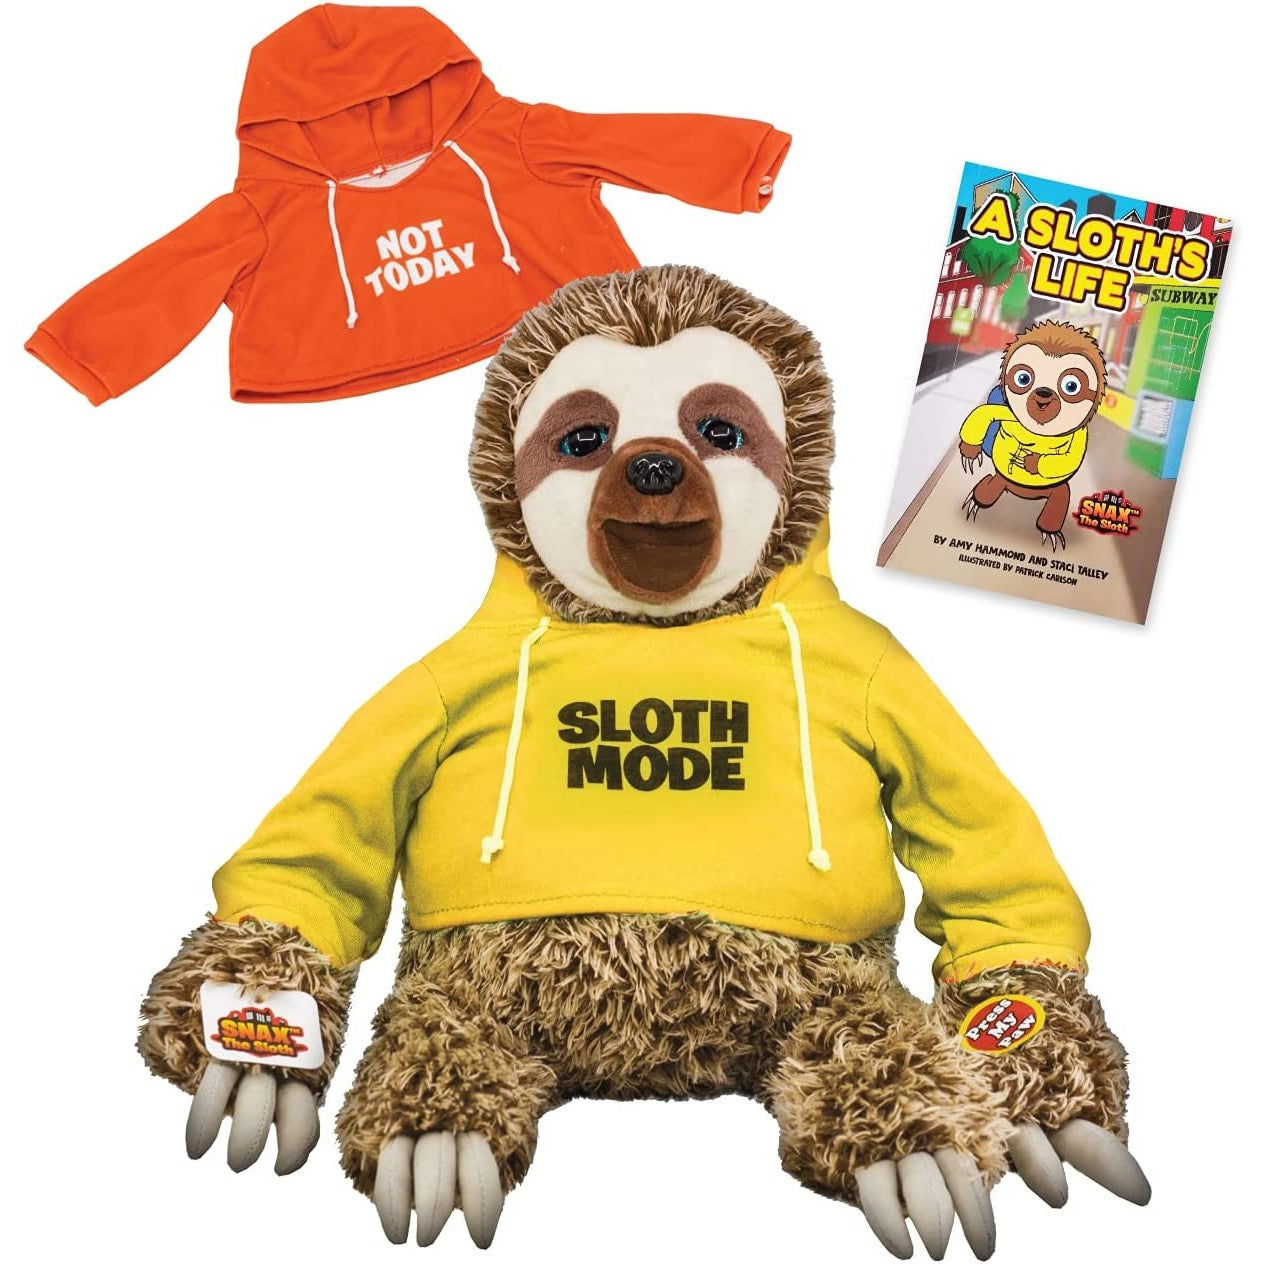 A sloth plush toy wearing a yellow tshirt which says 'sloth mode'. The sloth also comes with an additional red sweatshirt and a bonus book.